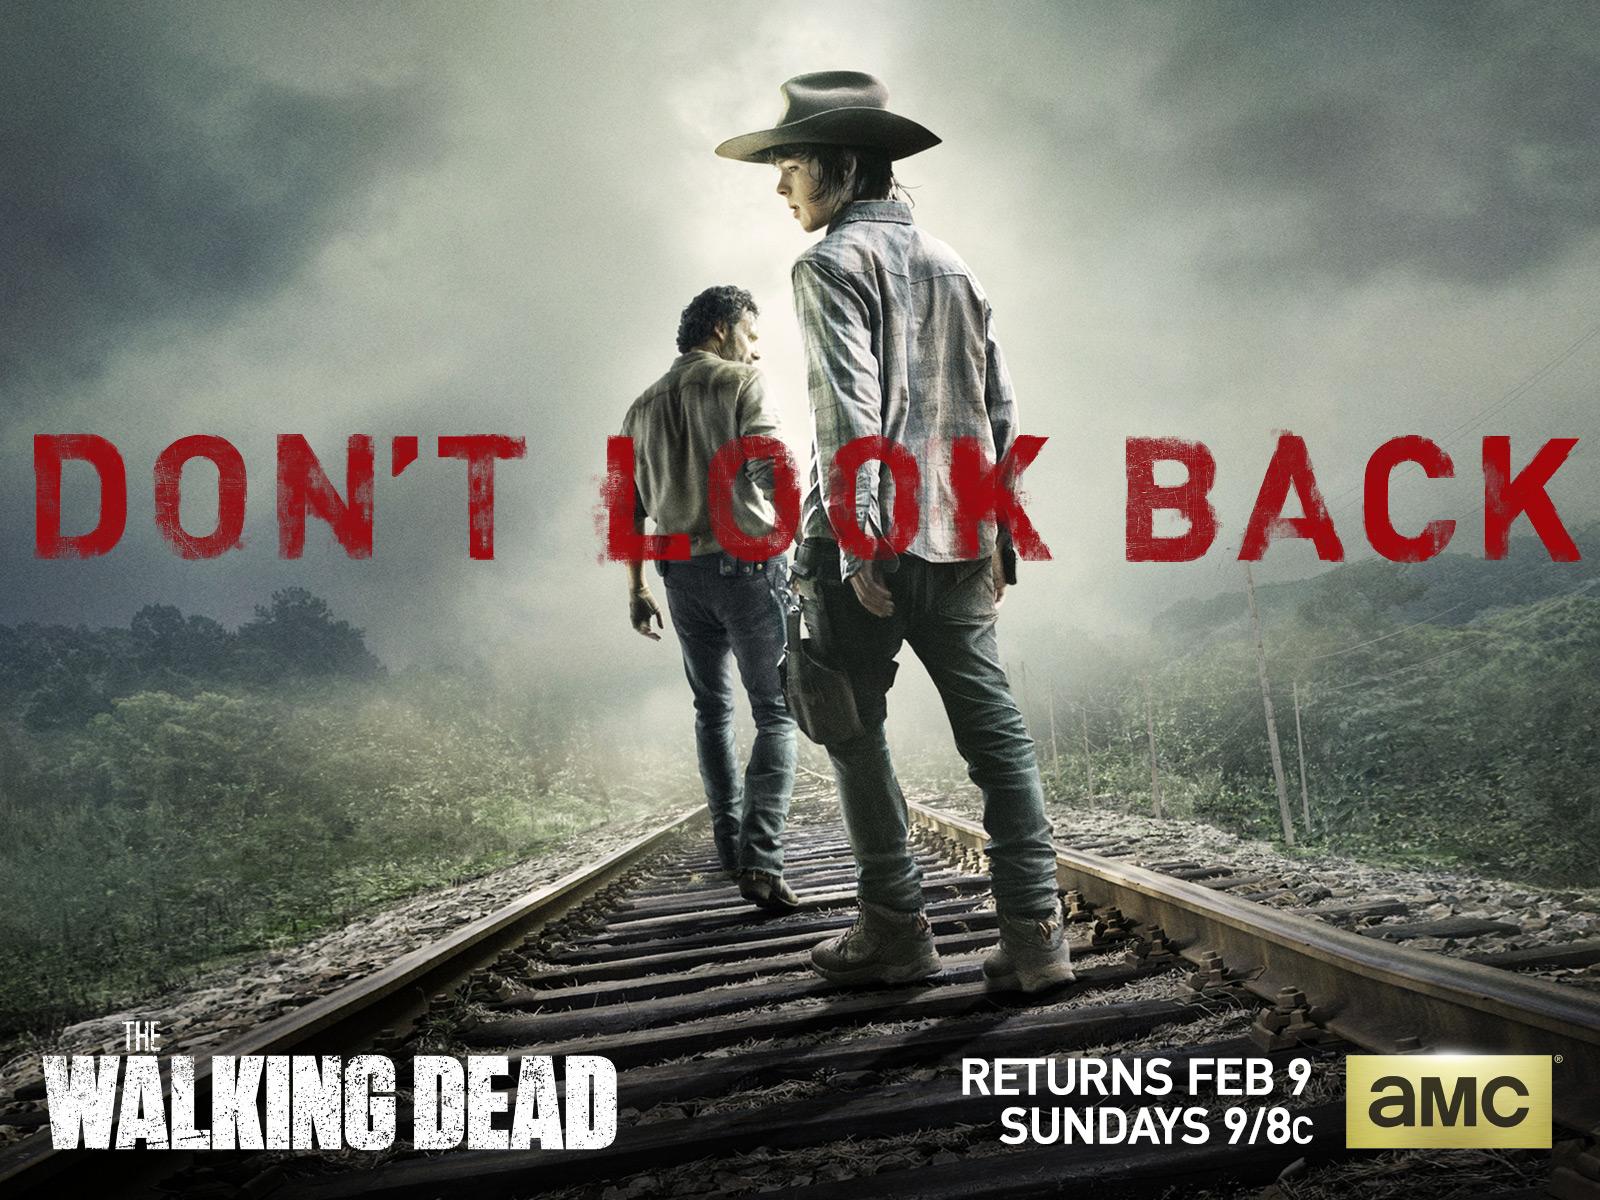 The Walking Dead Season 4 wallpaper with Carl and Rick. Movie